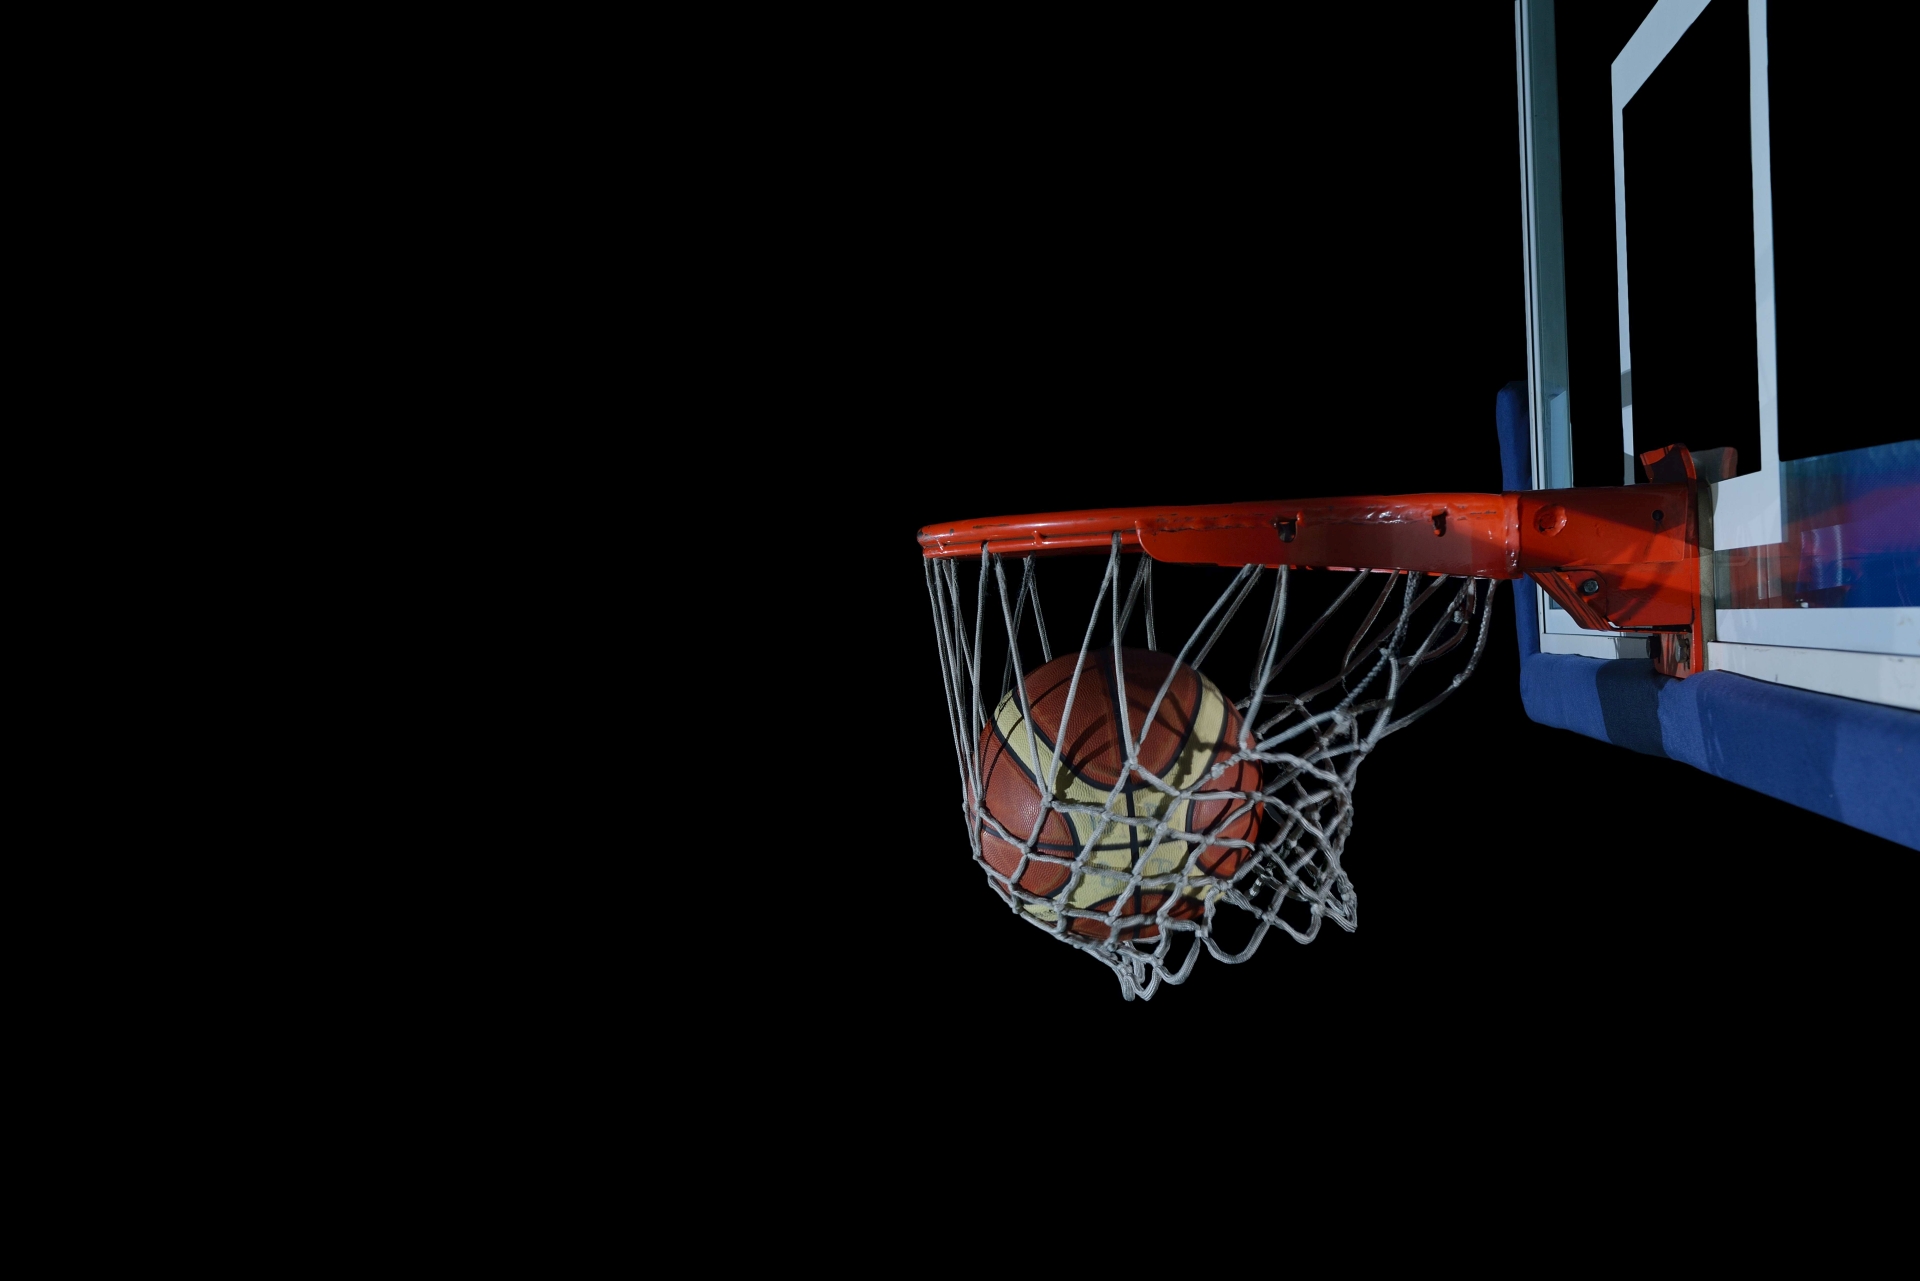 basketball ball and net on black background